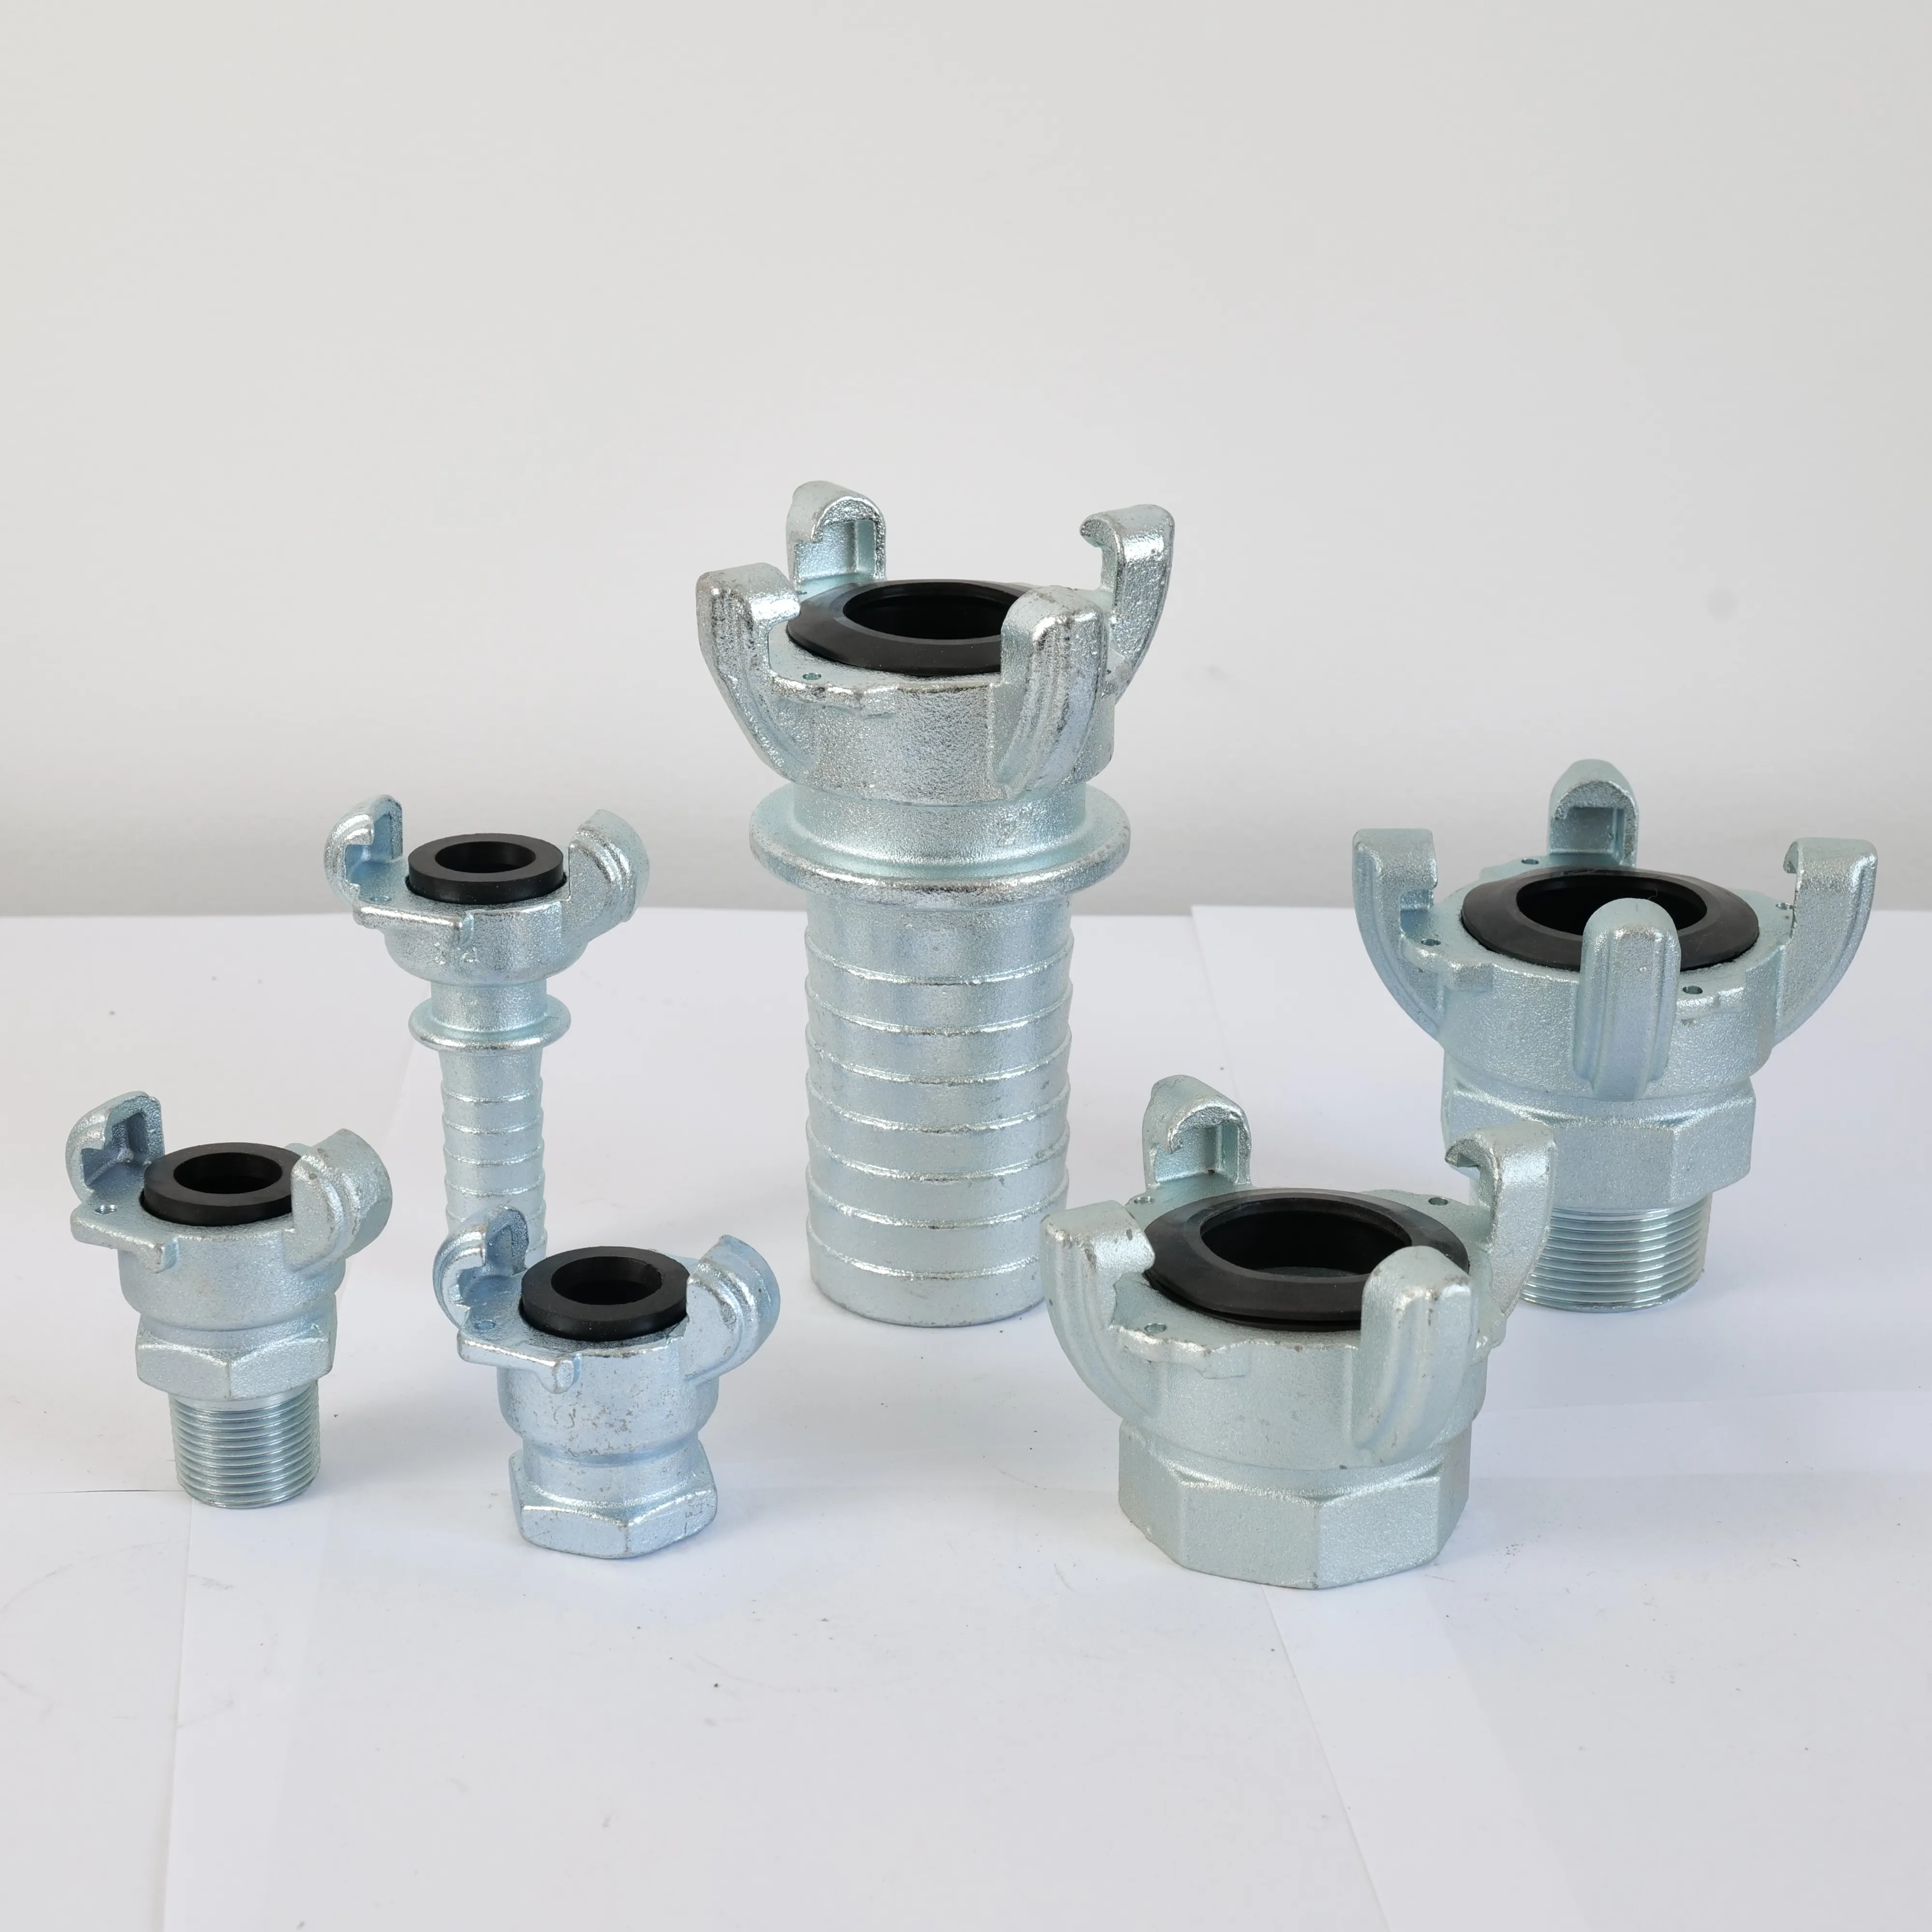 Universal claw couplings